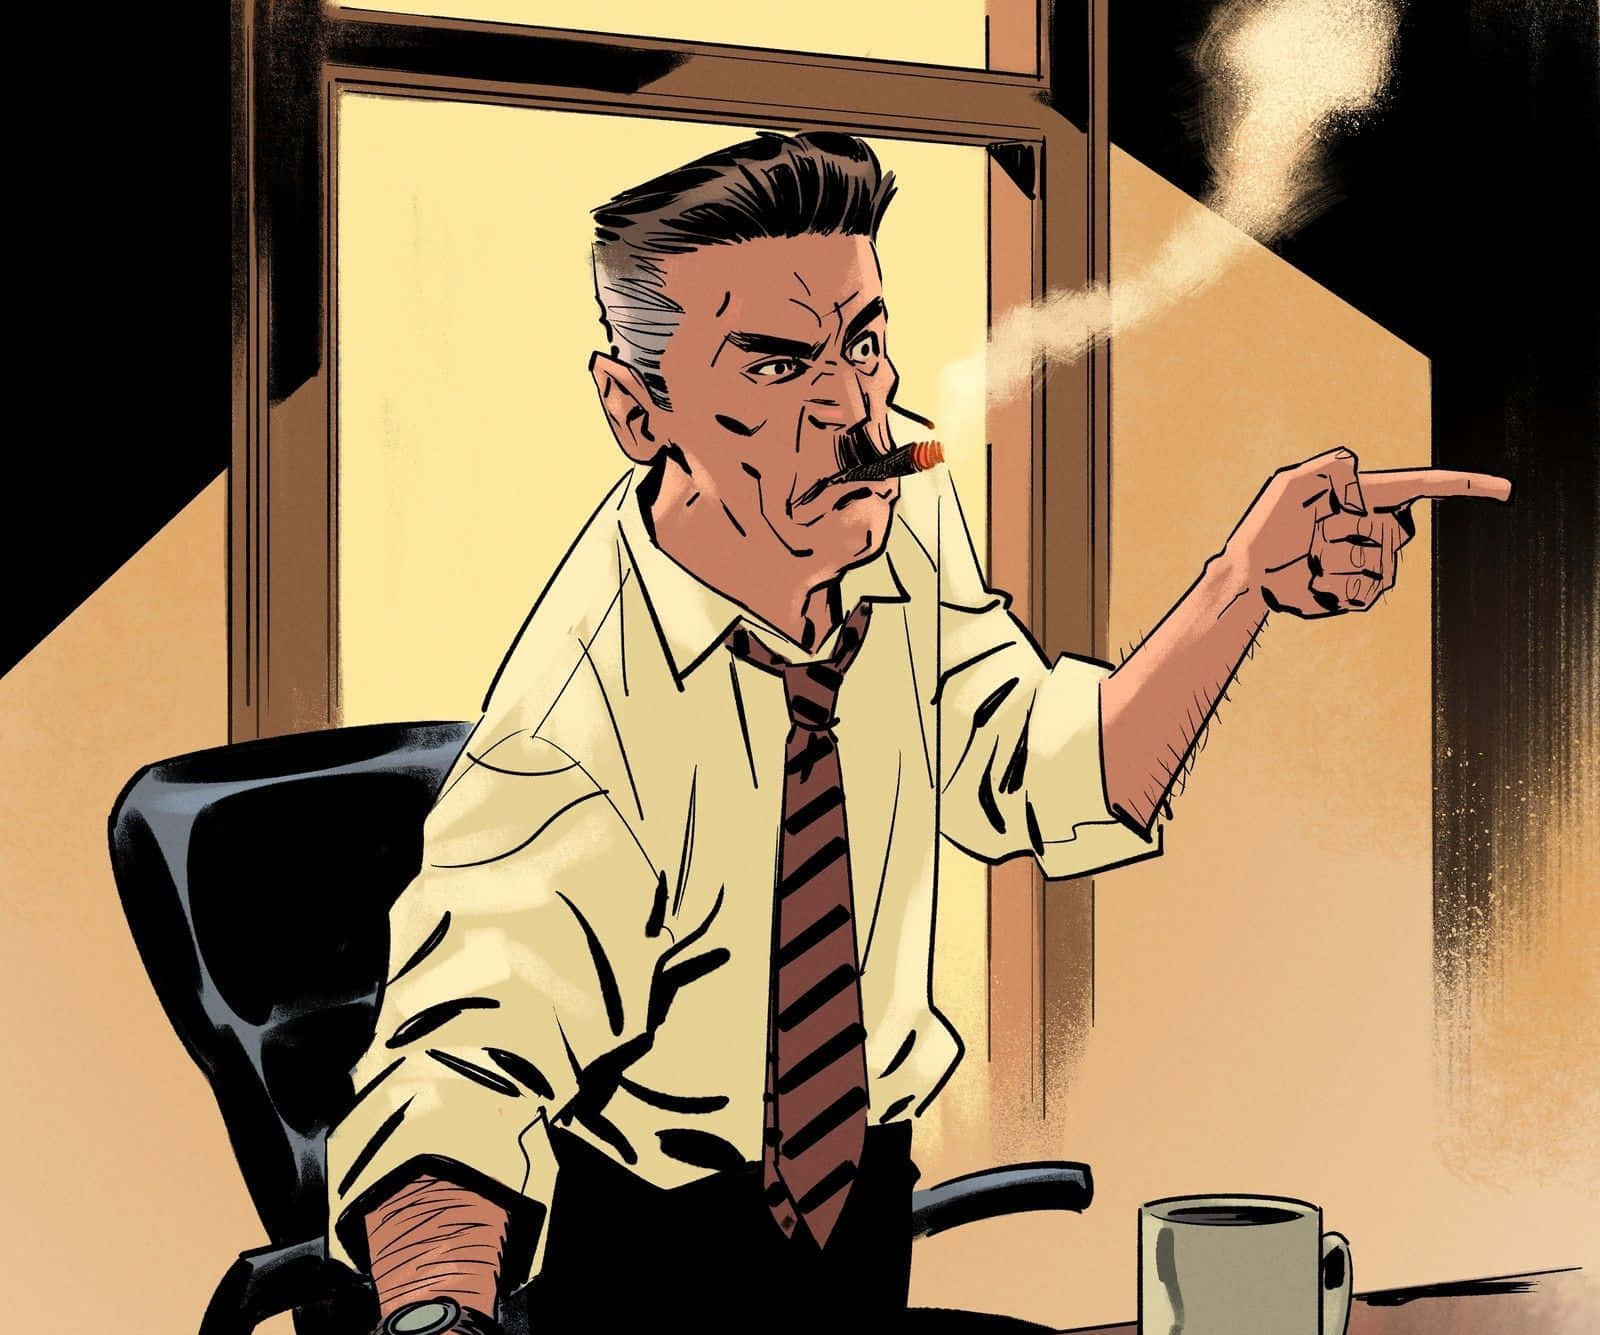 J. Jonah Jameson, Editor-in-chief of the Daily Bugle, discussing the latest Spider-Man news at his desk. Wallpaper